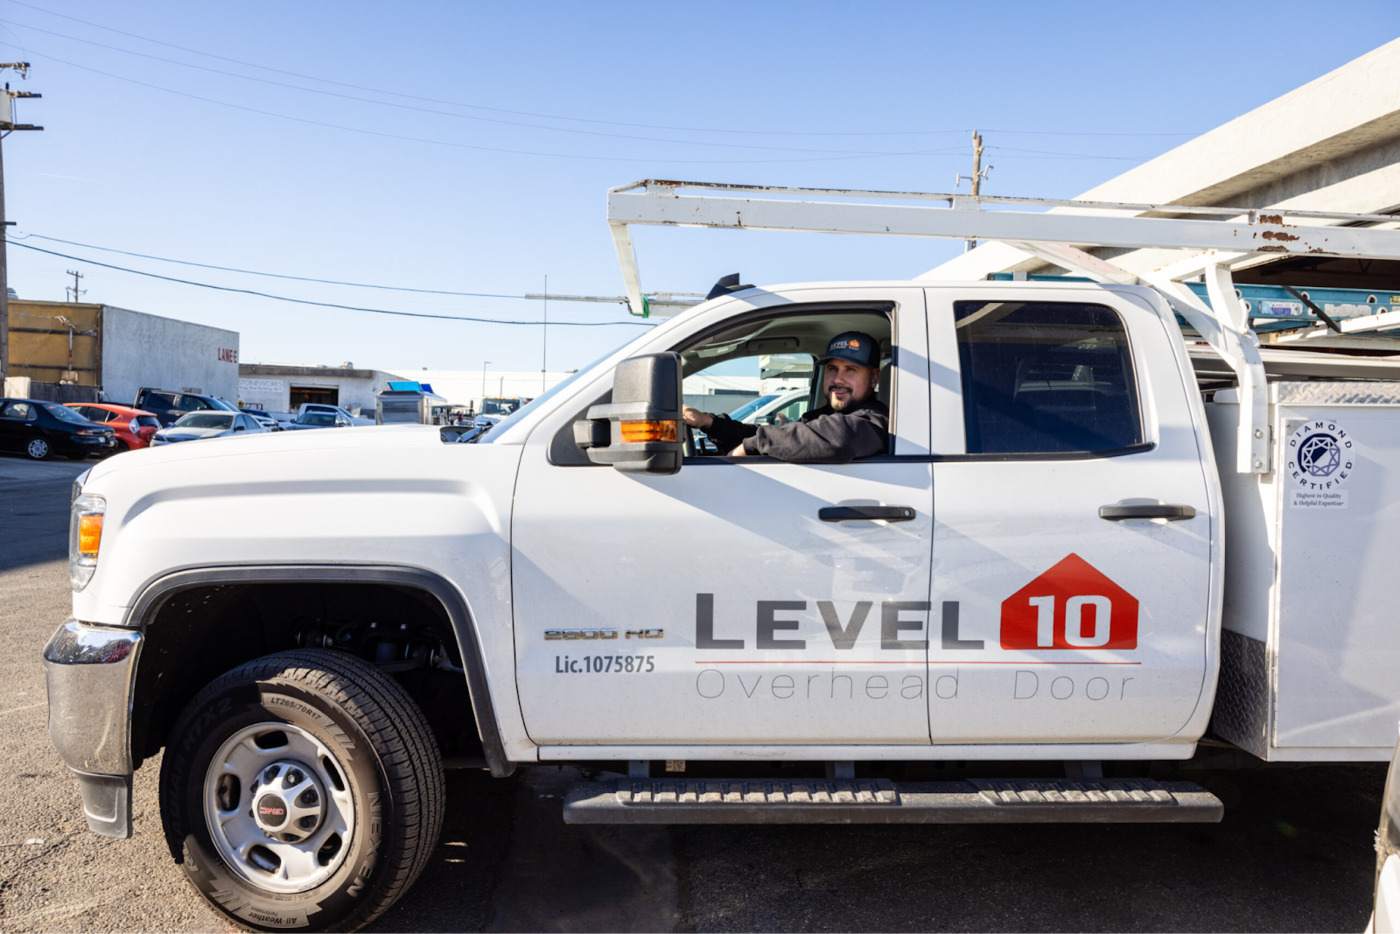 Level 10 Overhead Door is a locally owned and operated garage door service company offering installation, repair, and maintenance.